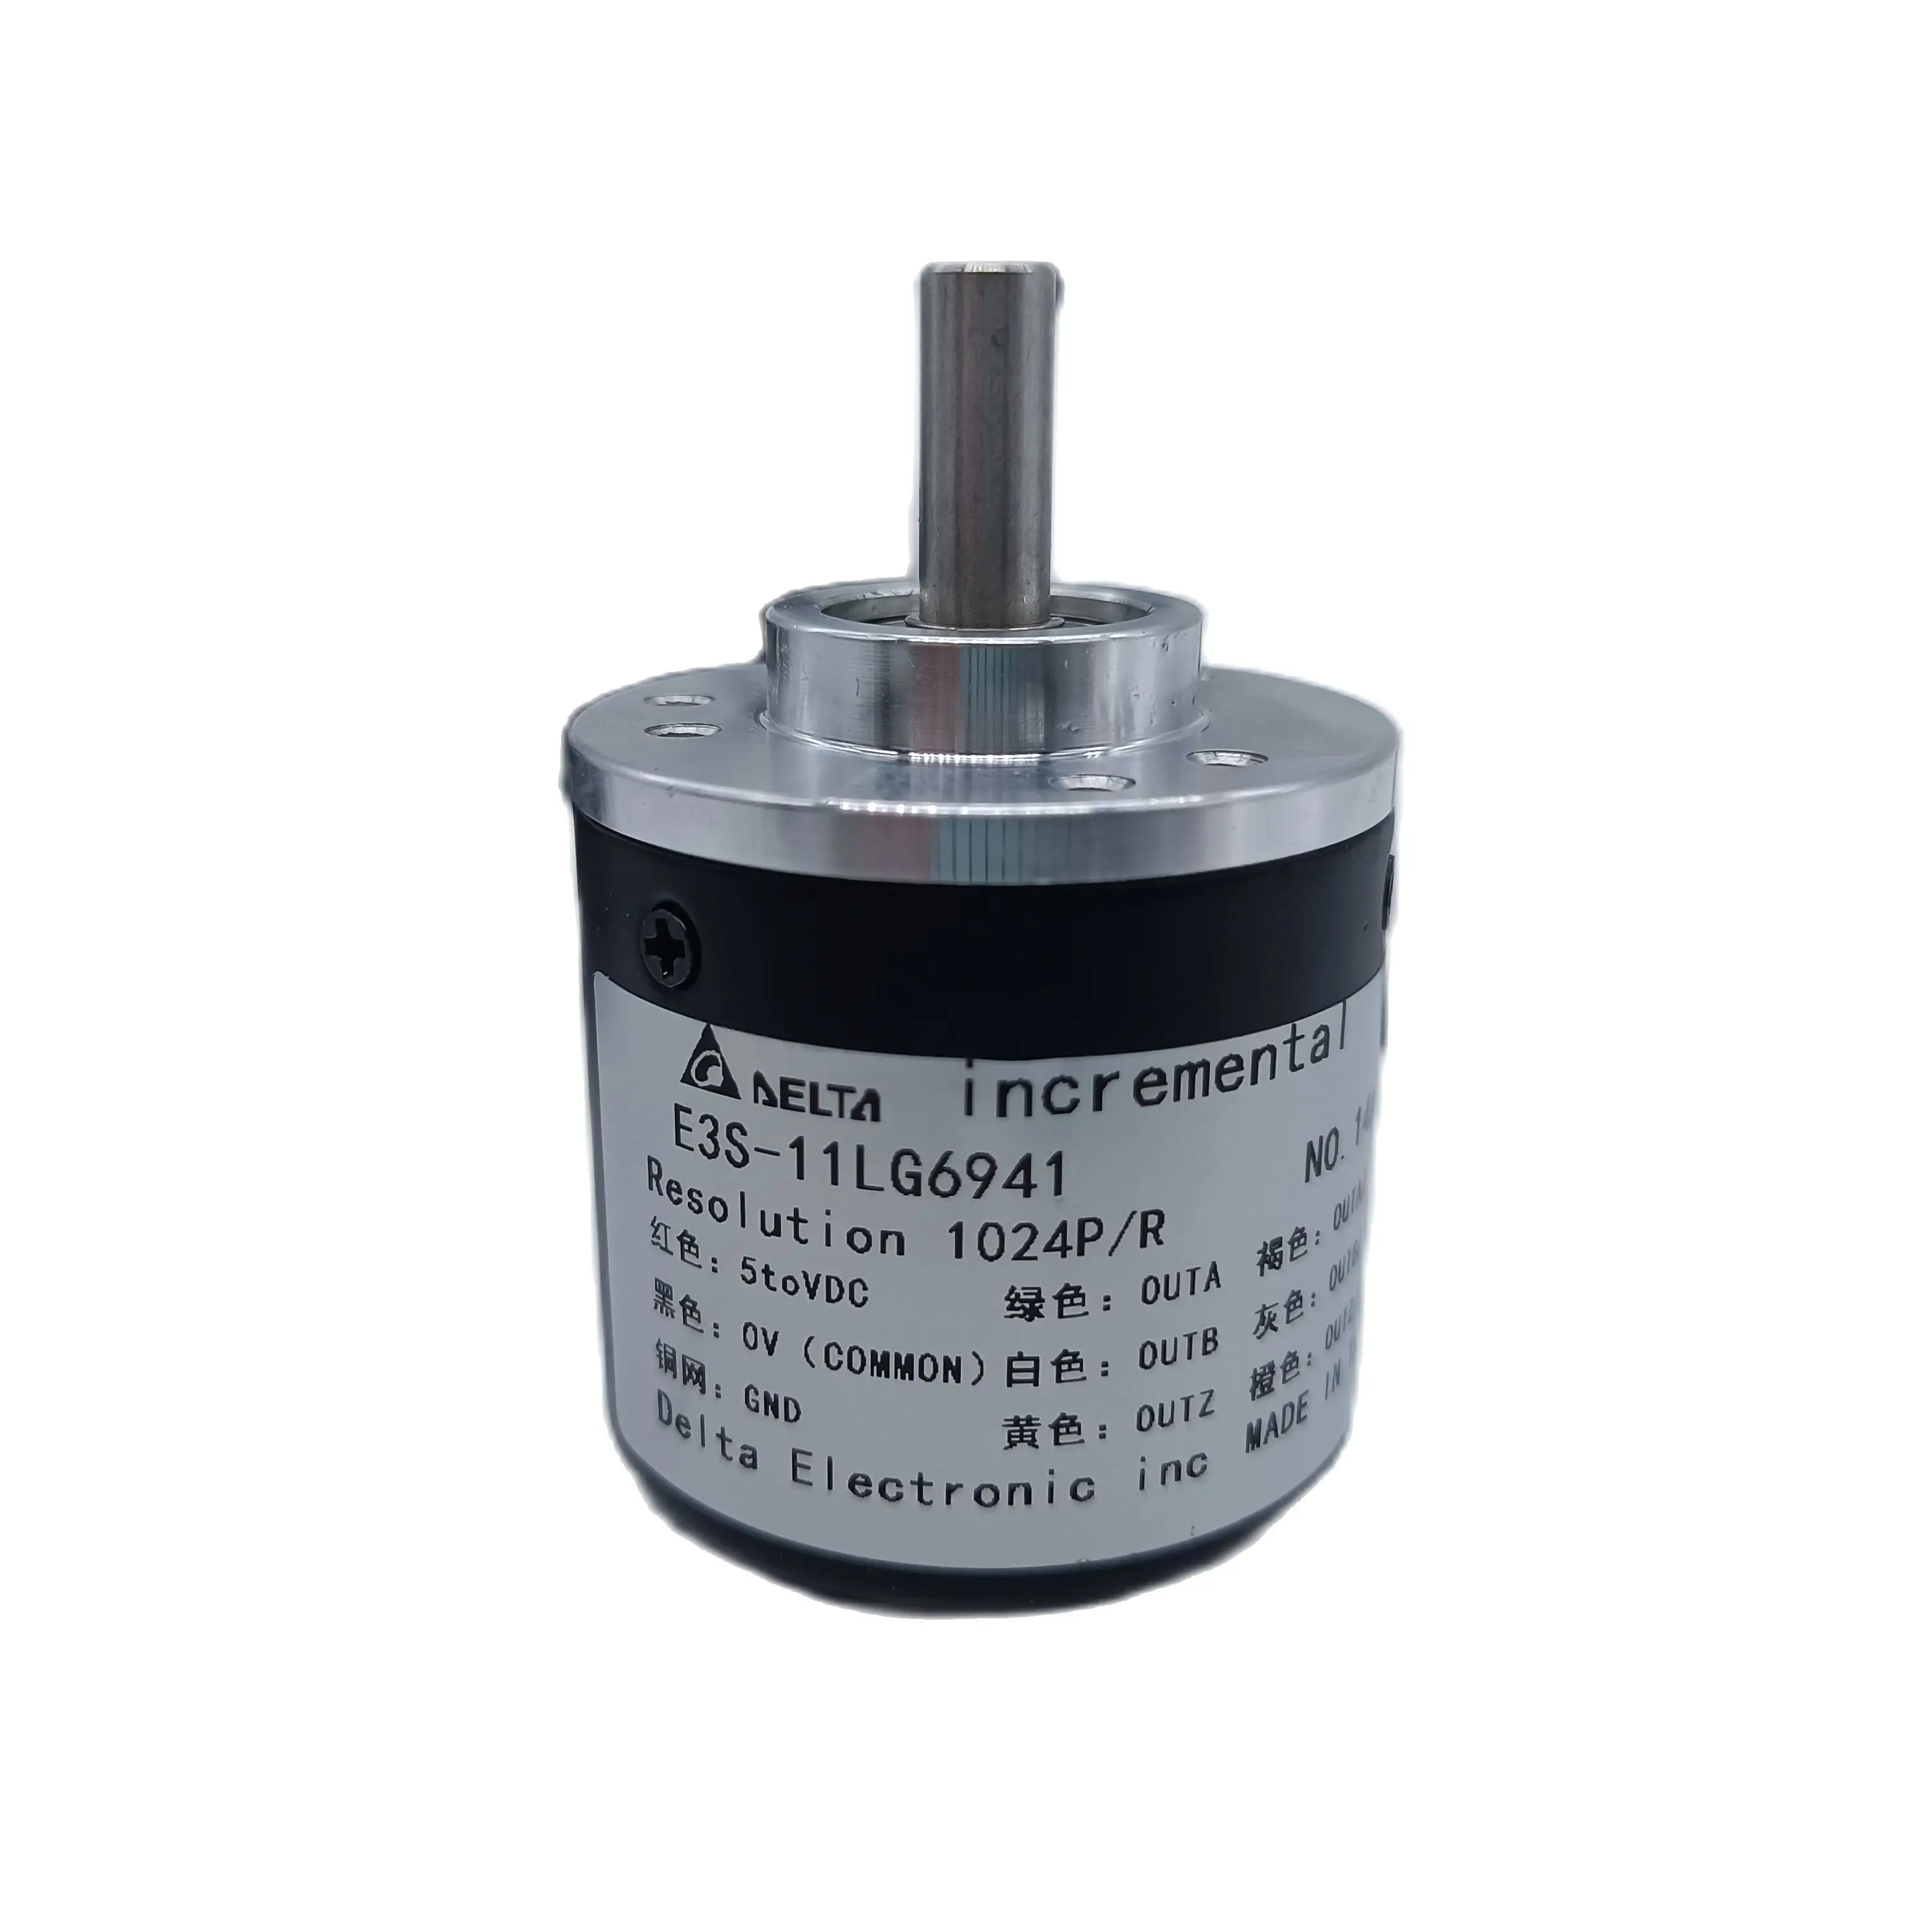 Fast shippingSpot New ES3-11LG6841 Rotating 11LN6541 Encoder Outer Diameter 36 Solid Shaft 6 Pulse 1024